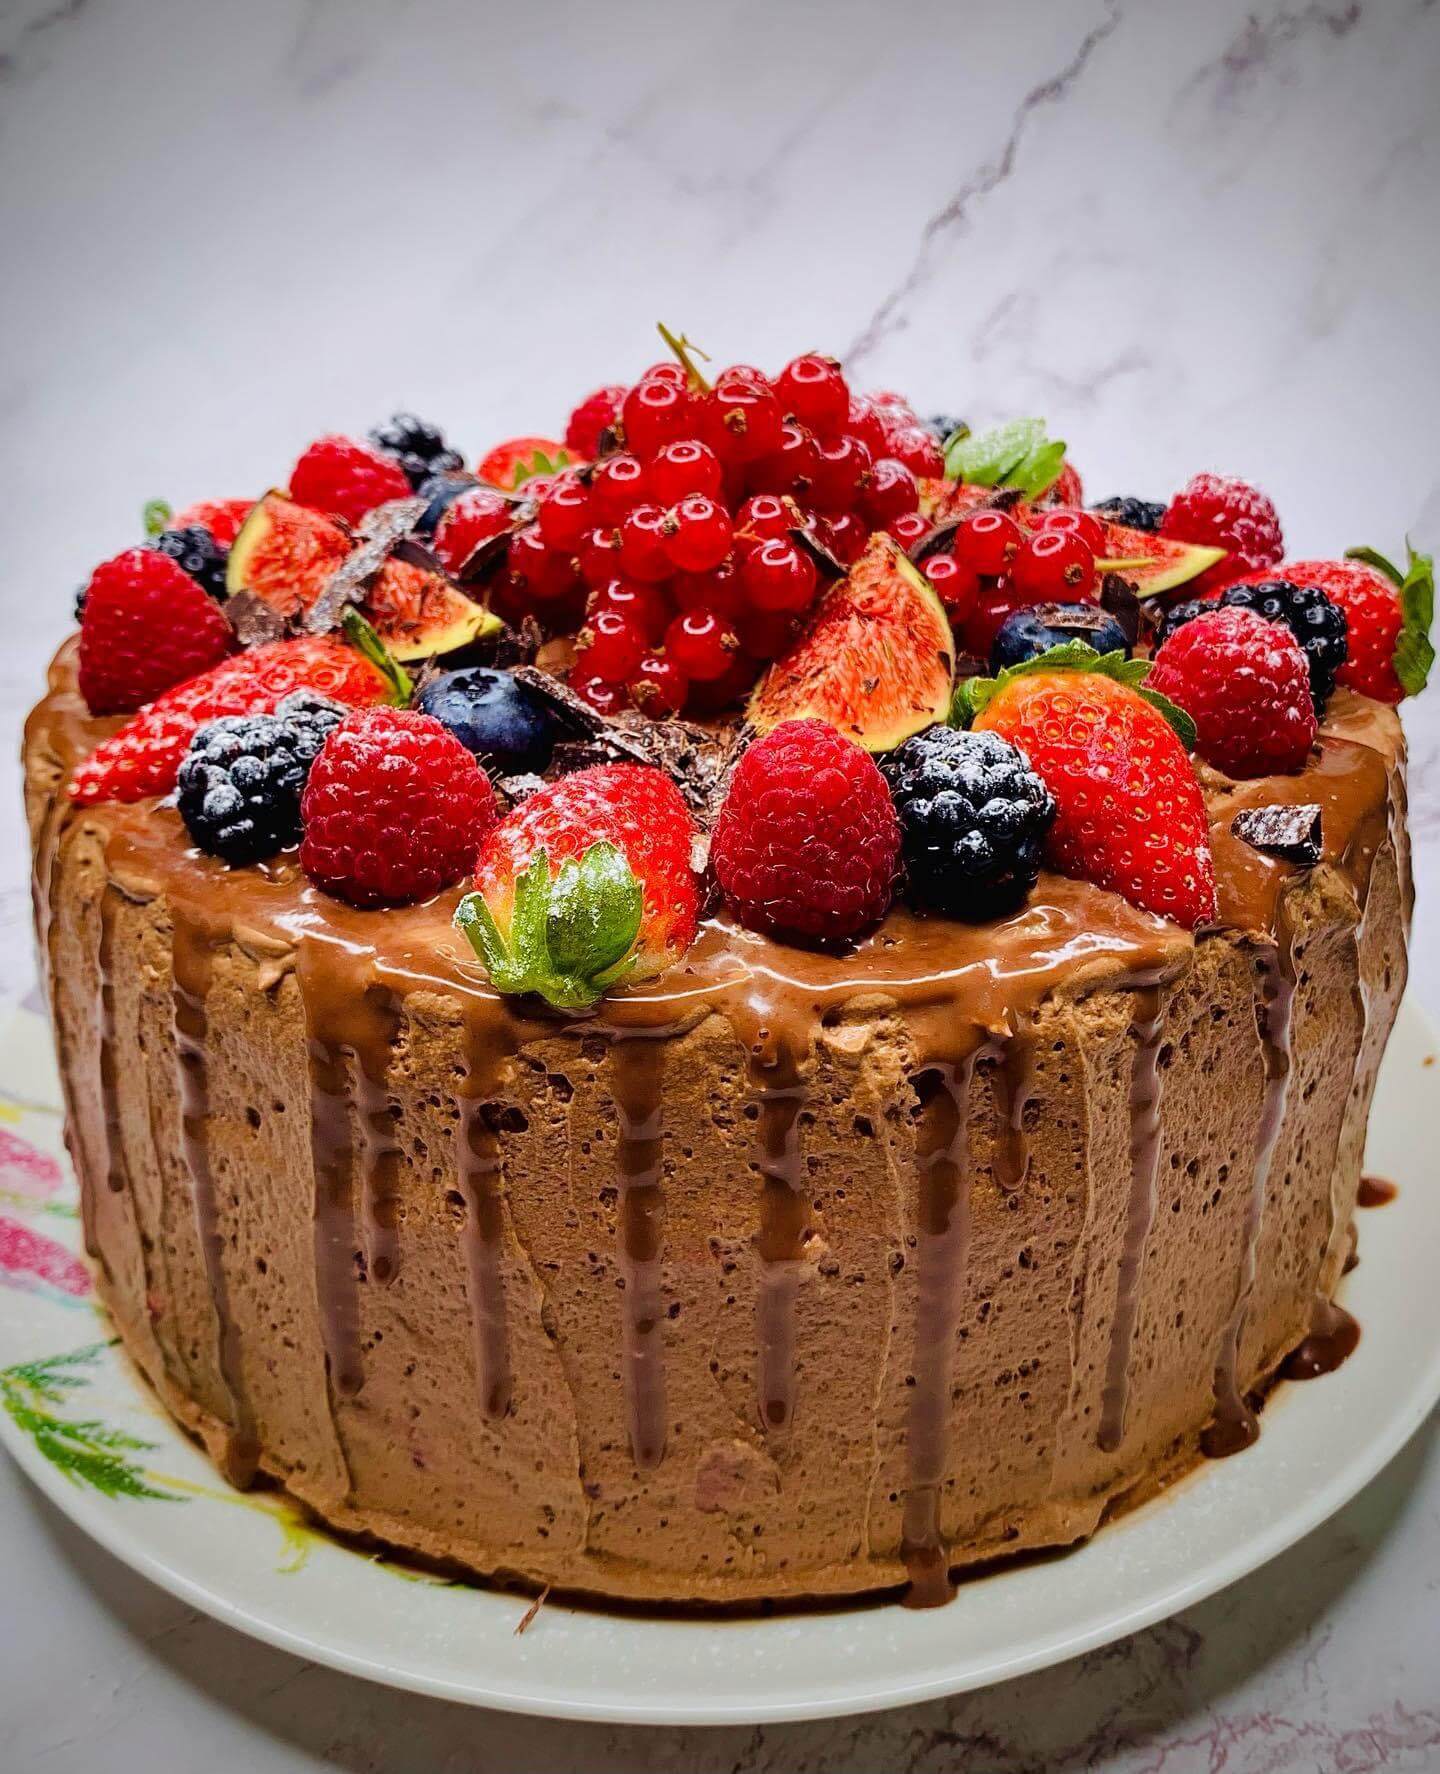 A chocolate cake topped with fresh berries and a rich chocolate drizzle.